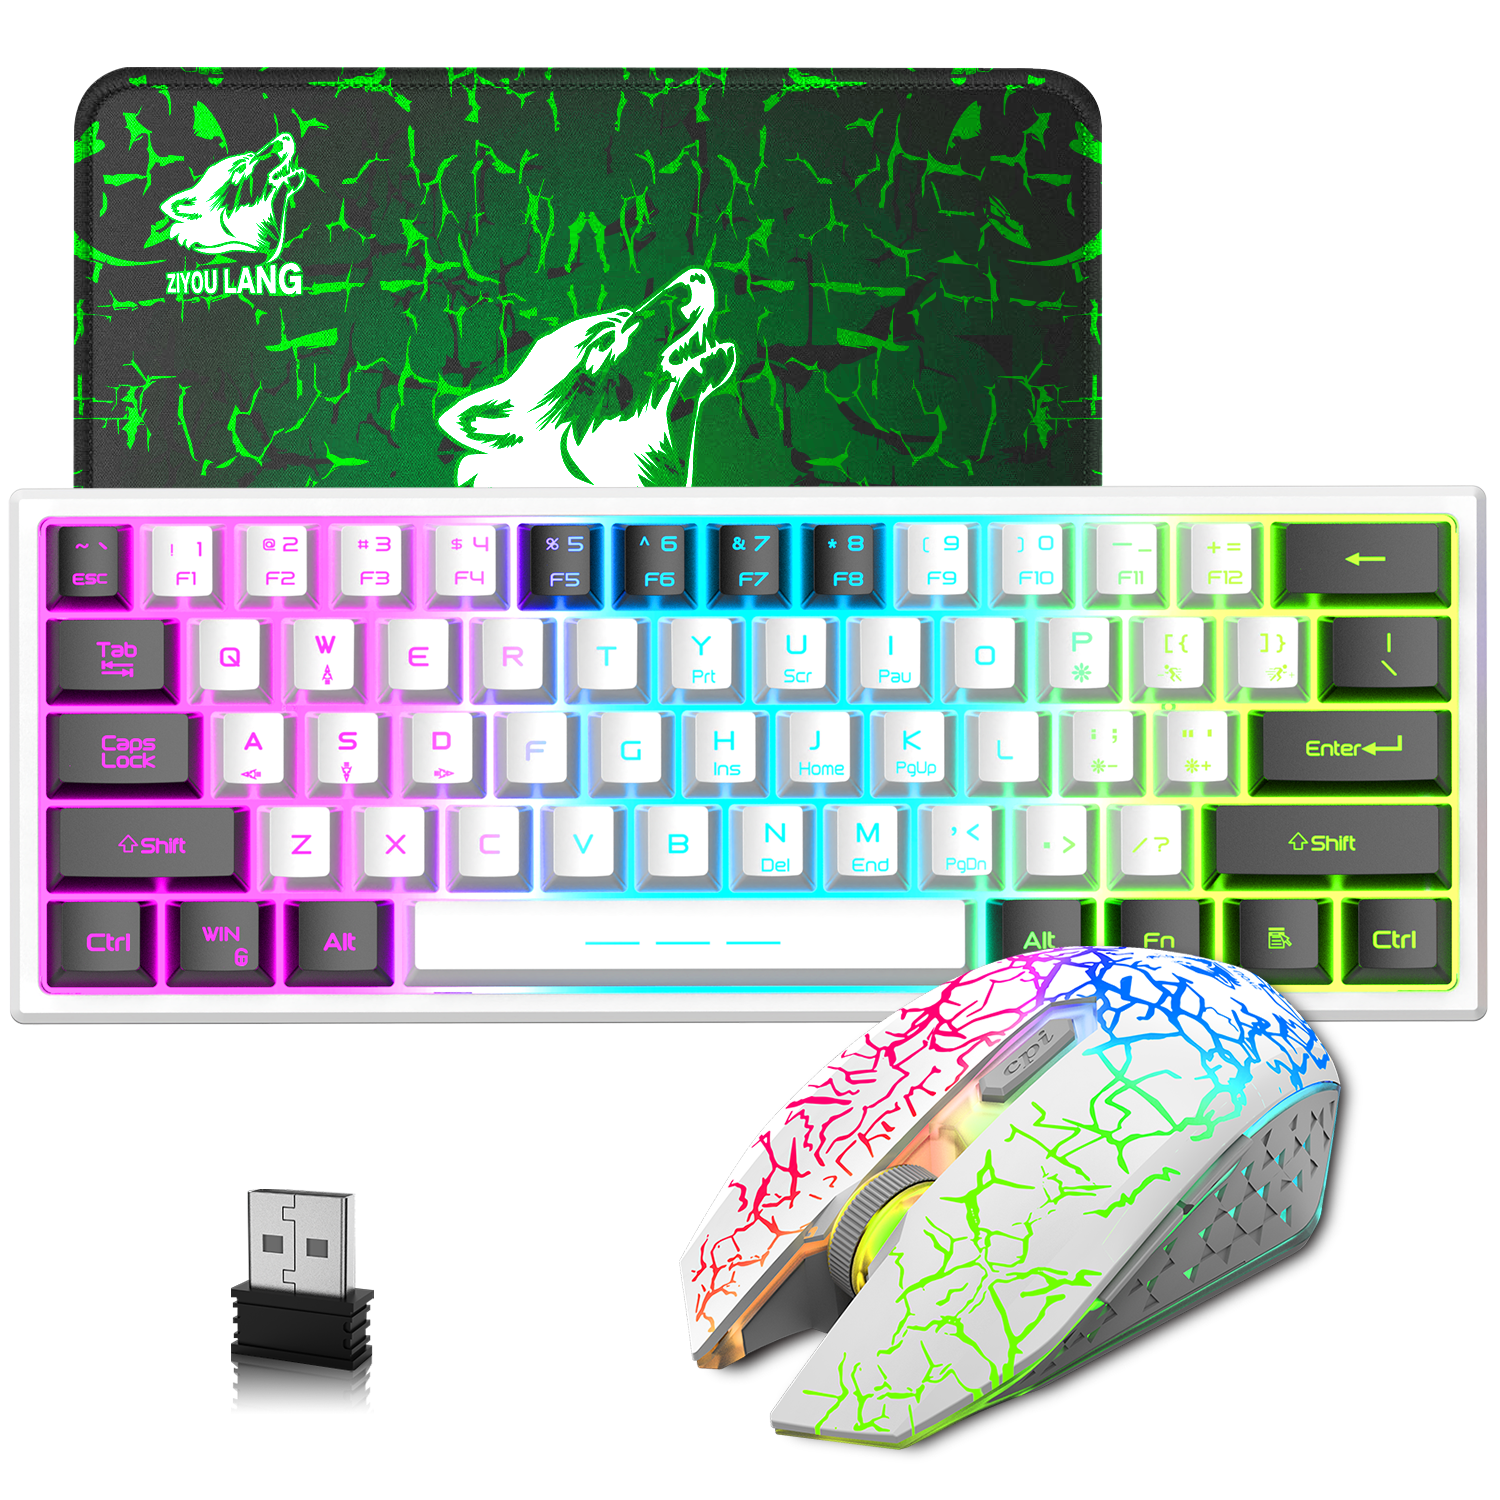 ZIYOU LANG T61 60% Ultra Compact Wireless Gaming Keyboard and Mouse Set with Mousepad 2400 DPI Rainbow Backlit 3800 mAh Rechargeable